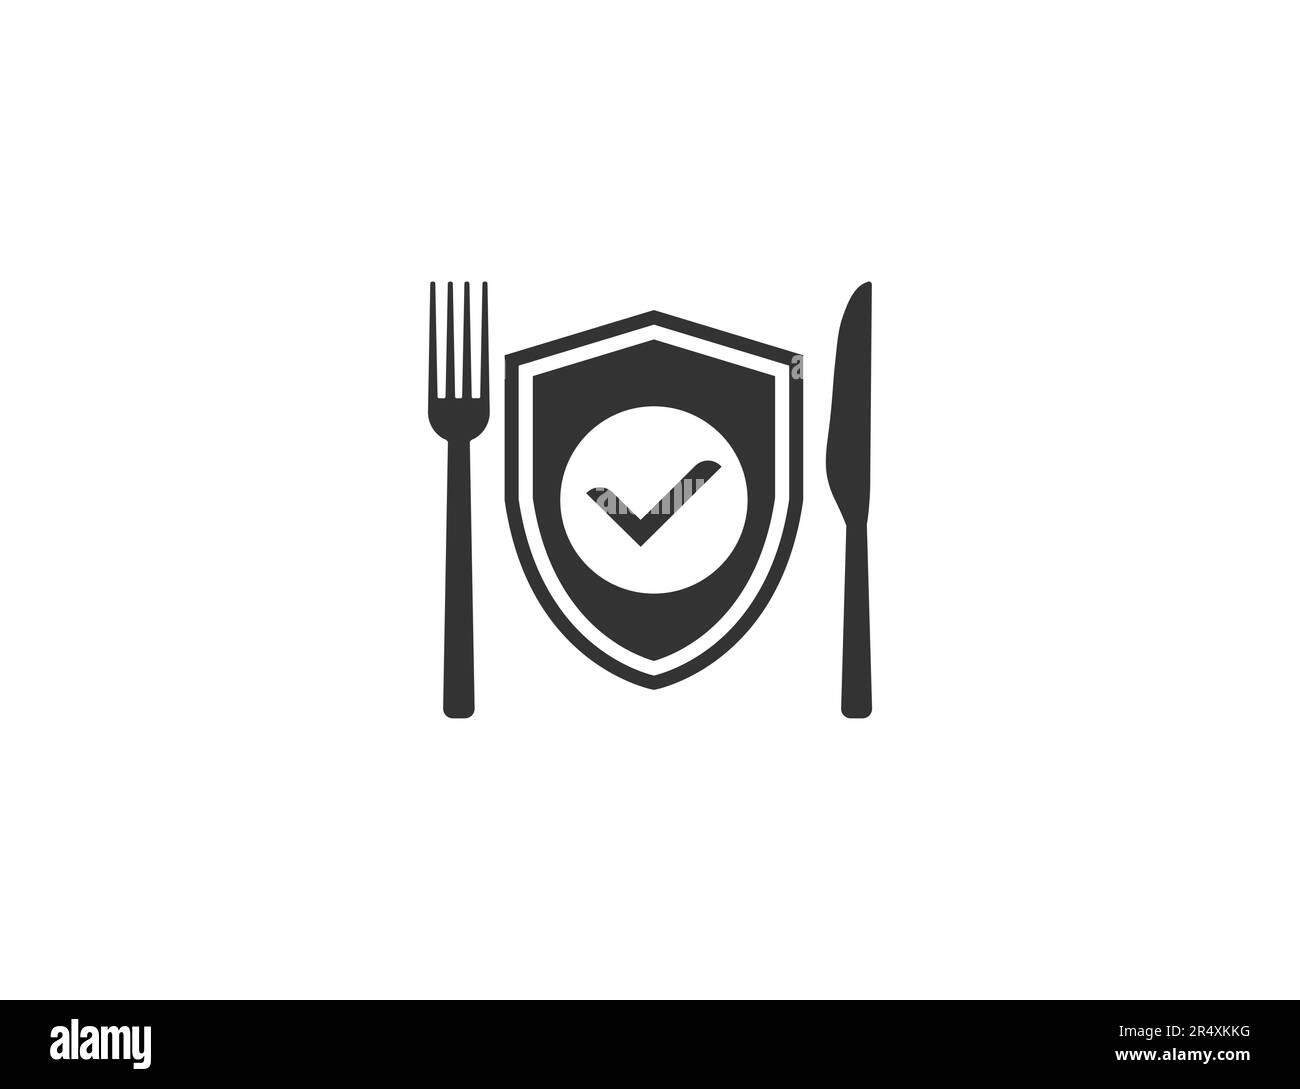 Food safety icon. Vector illustration. Stock Vector